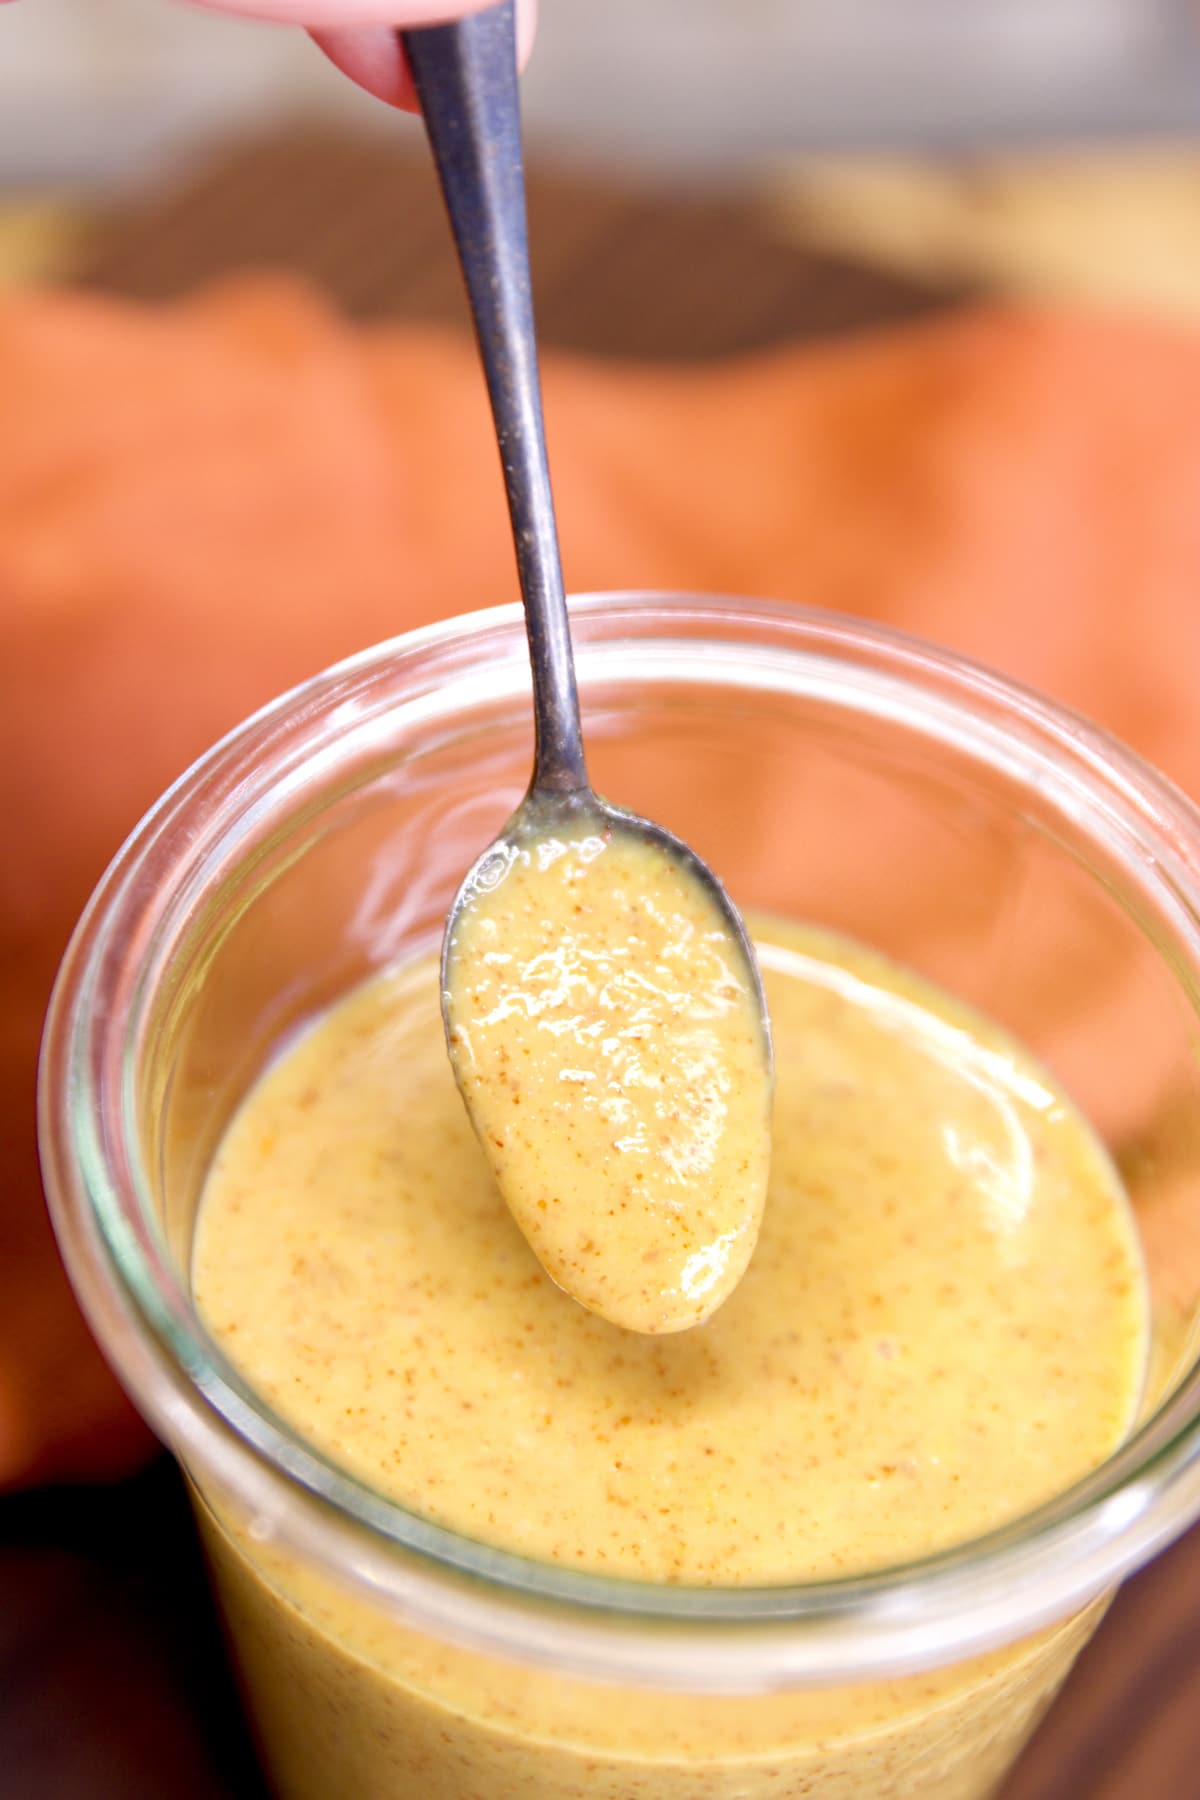 Spoonful of honey mustard sauce dipping from jar.